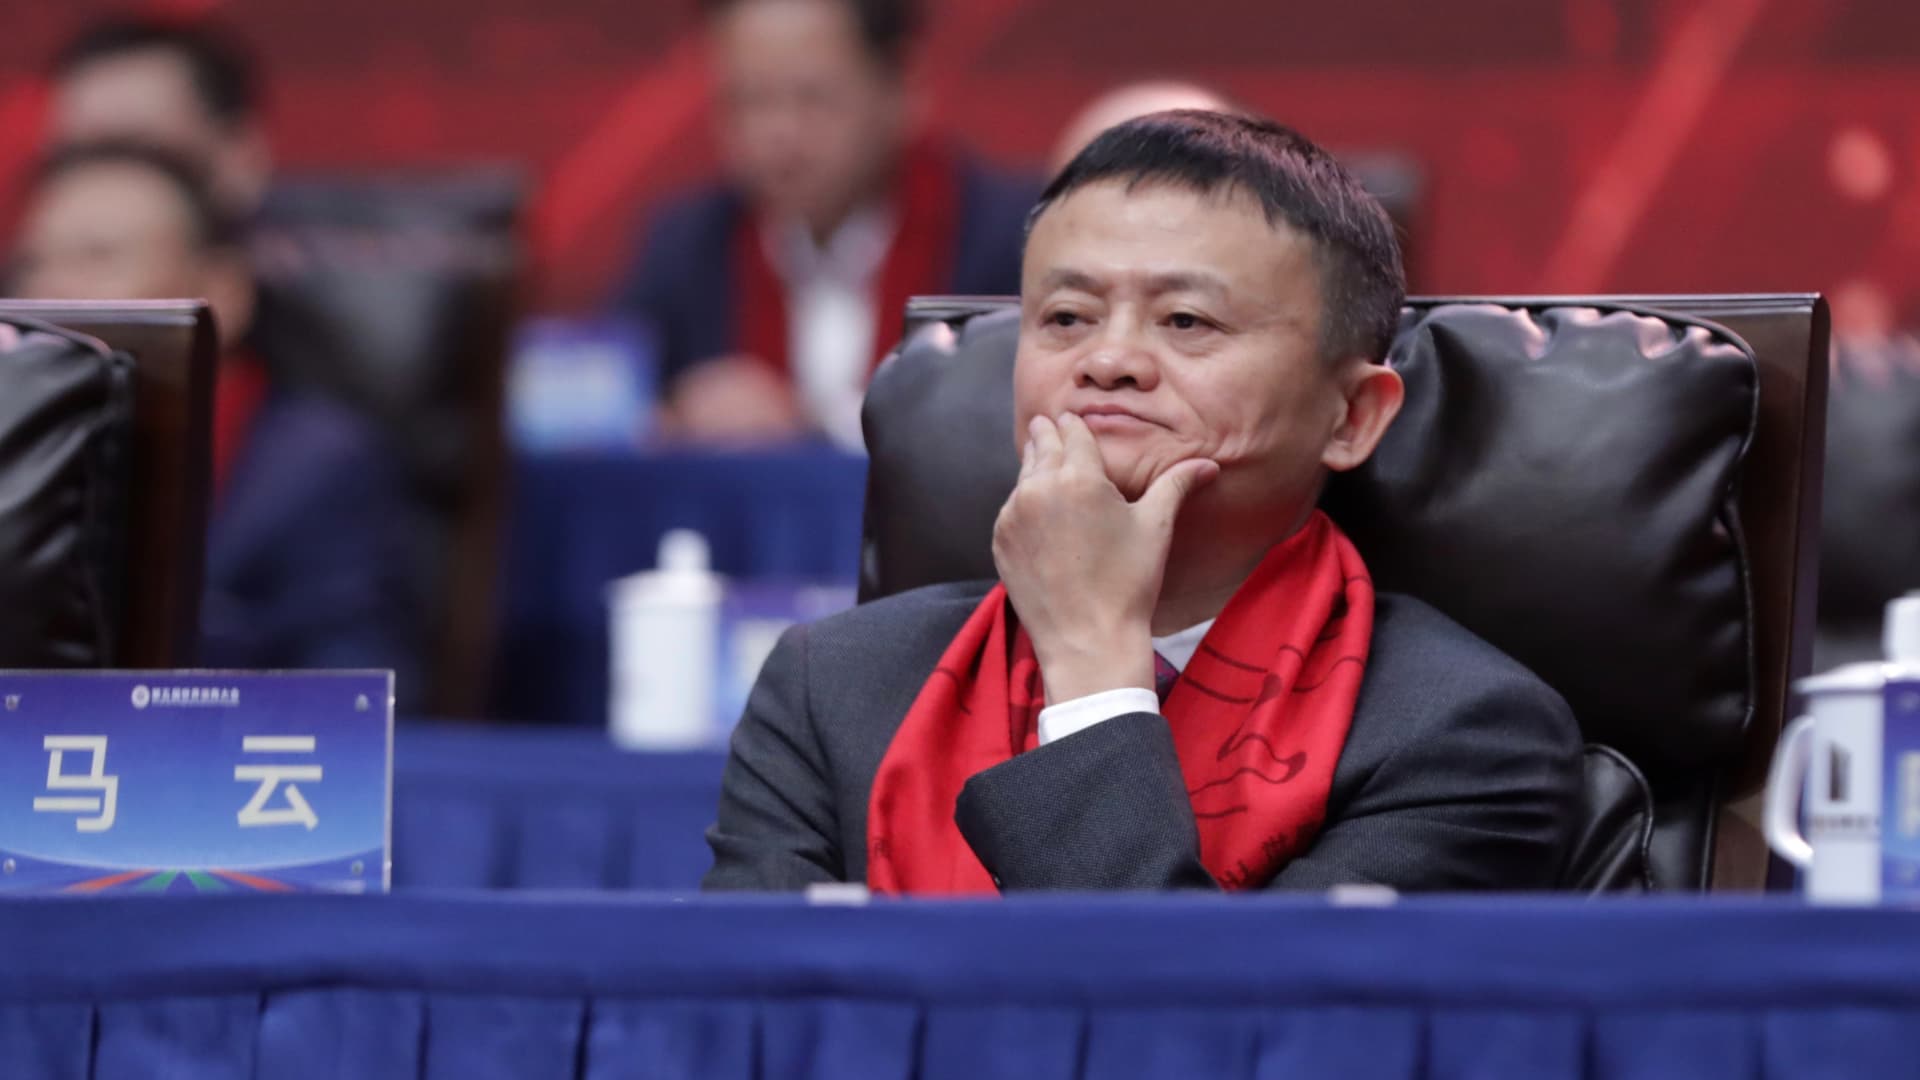 Jack Ma's uneasy relationship with Beijing casts shadow over Alibaba's strong earnings and future